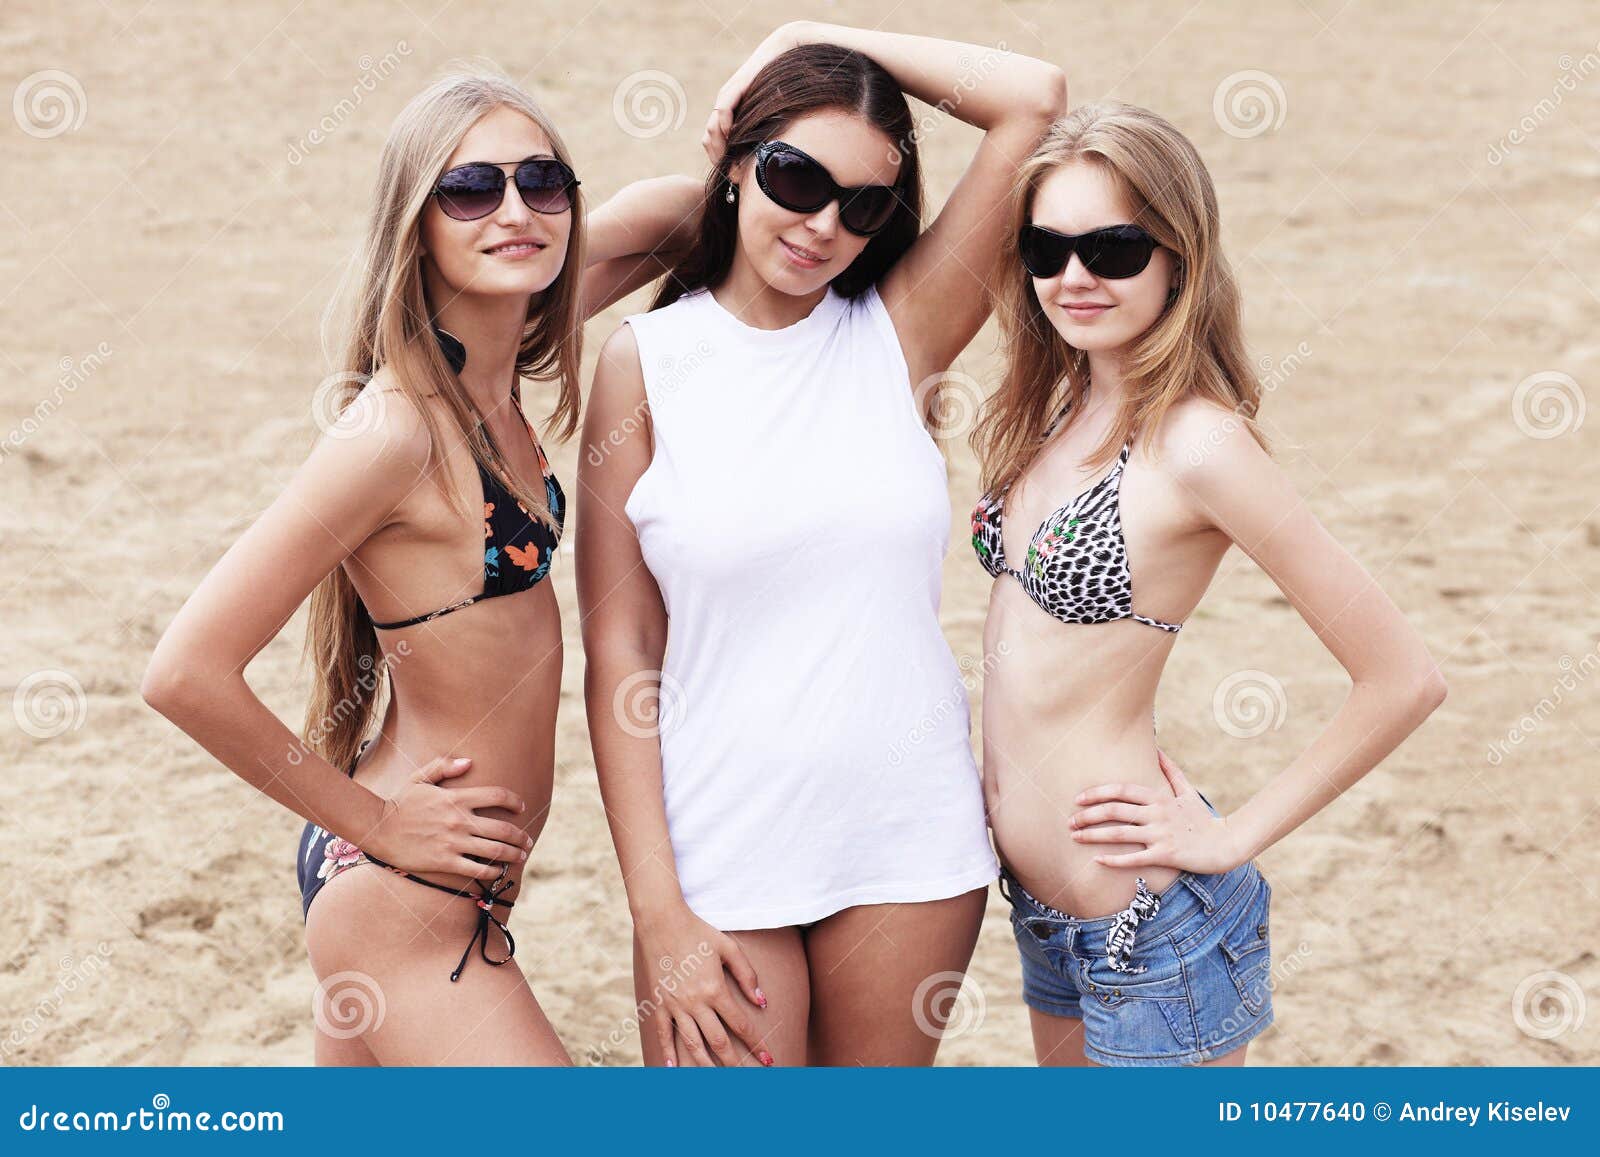 danny wesson recommends Beach Ladies Photos